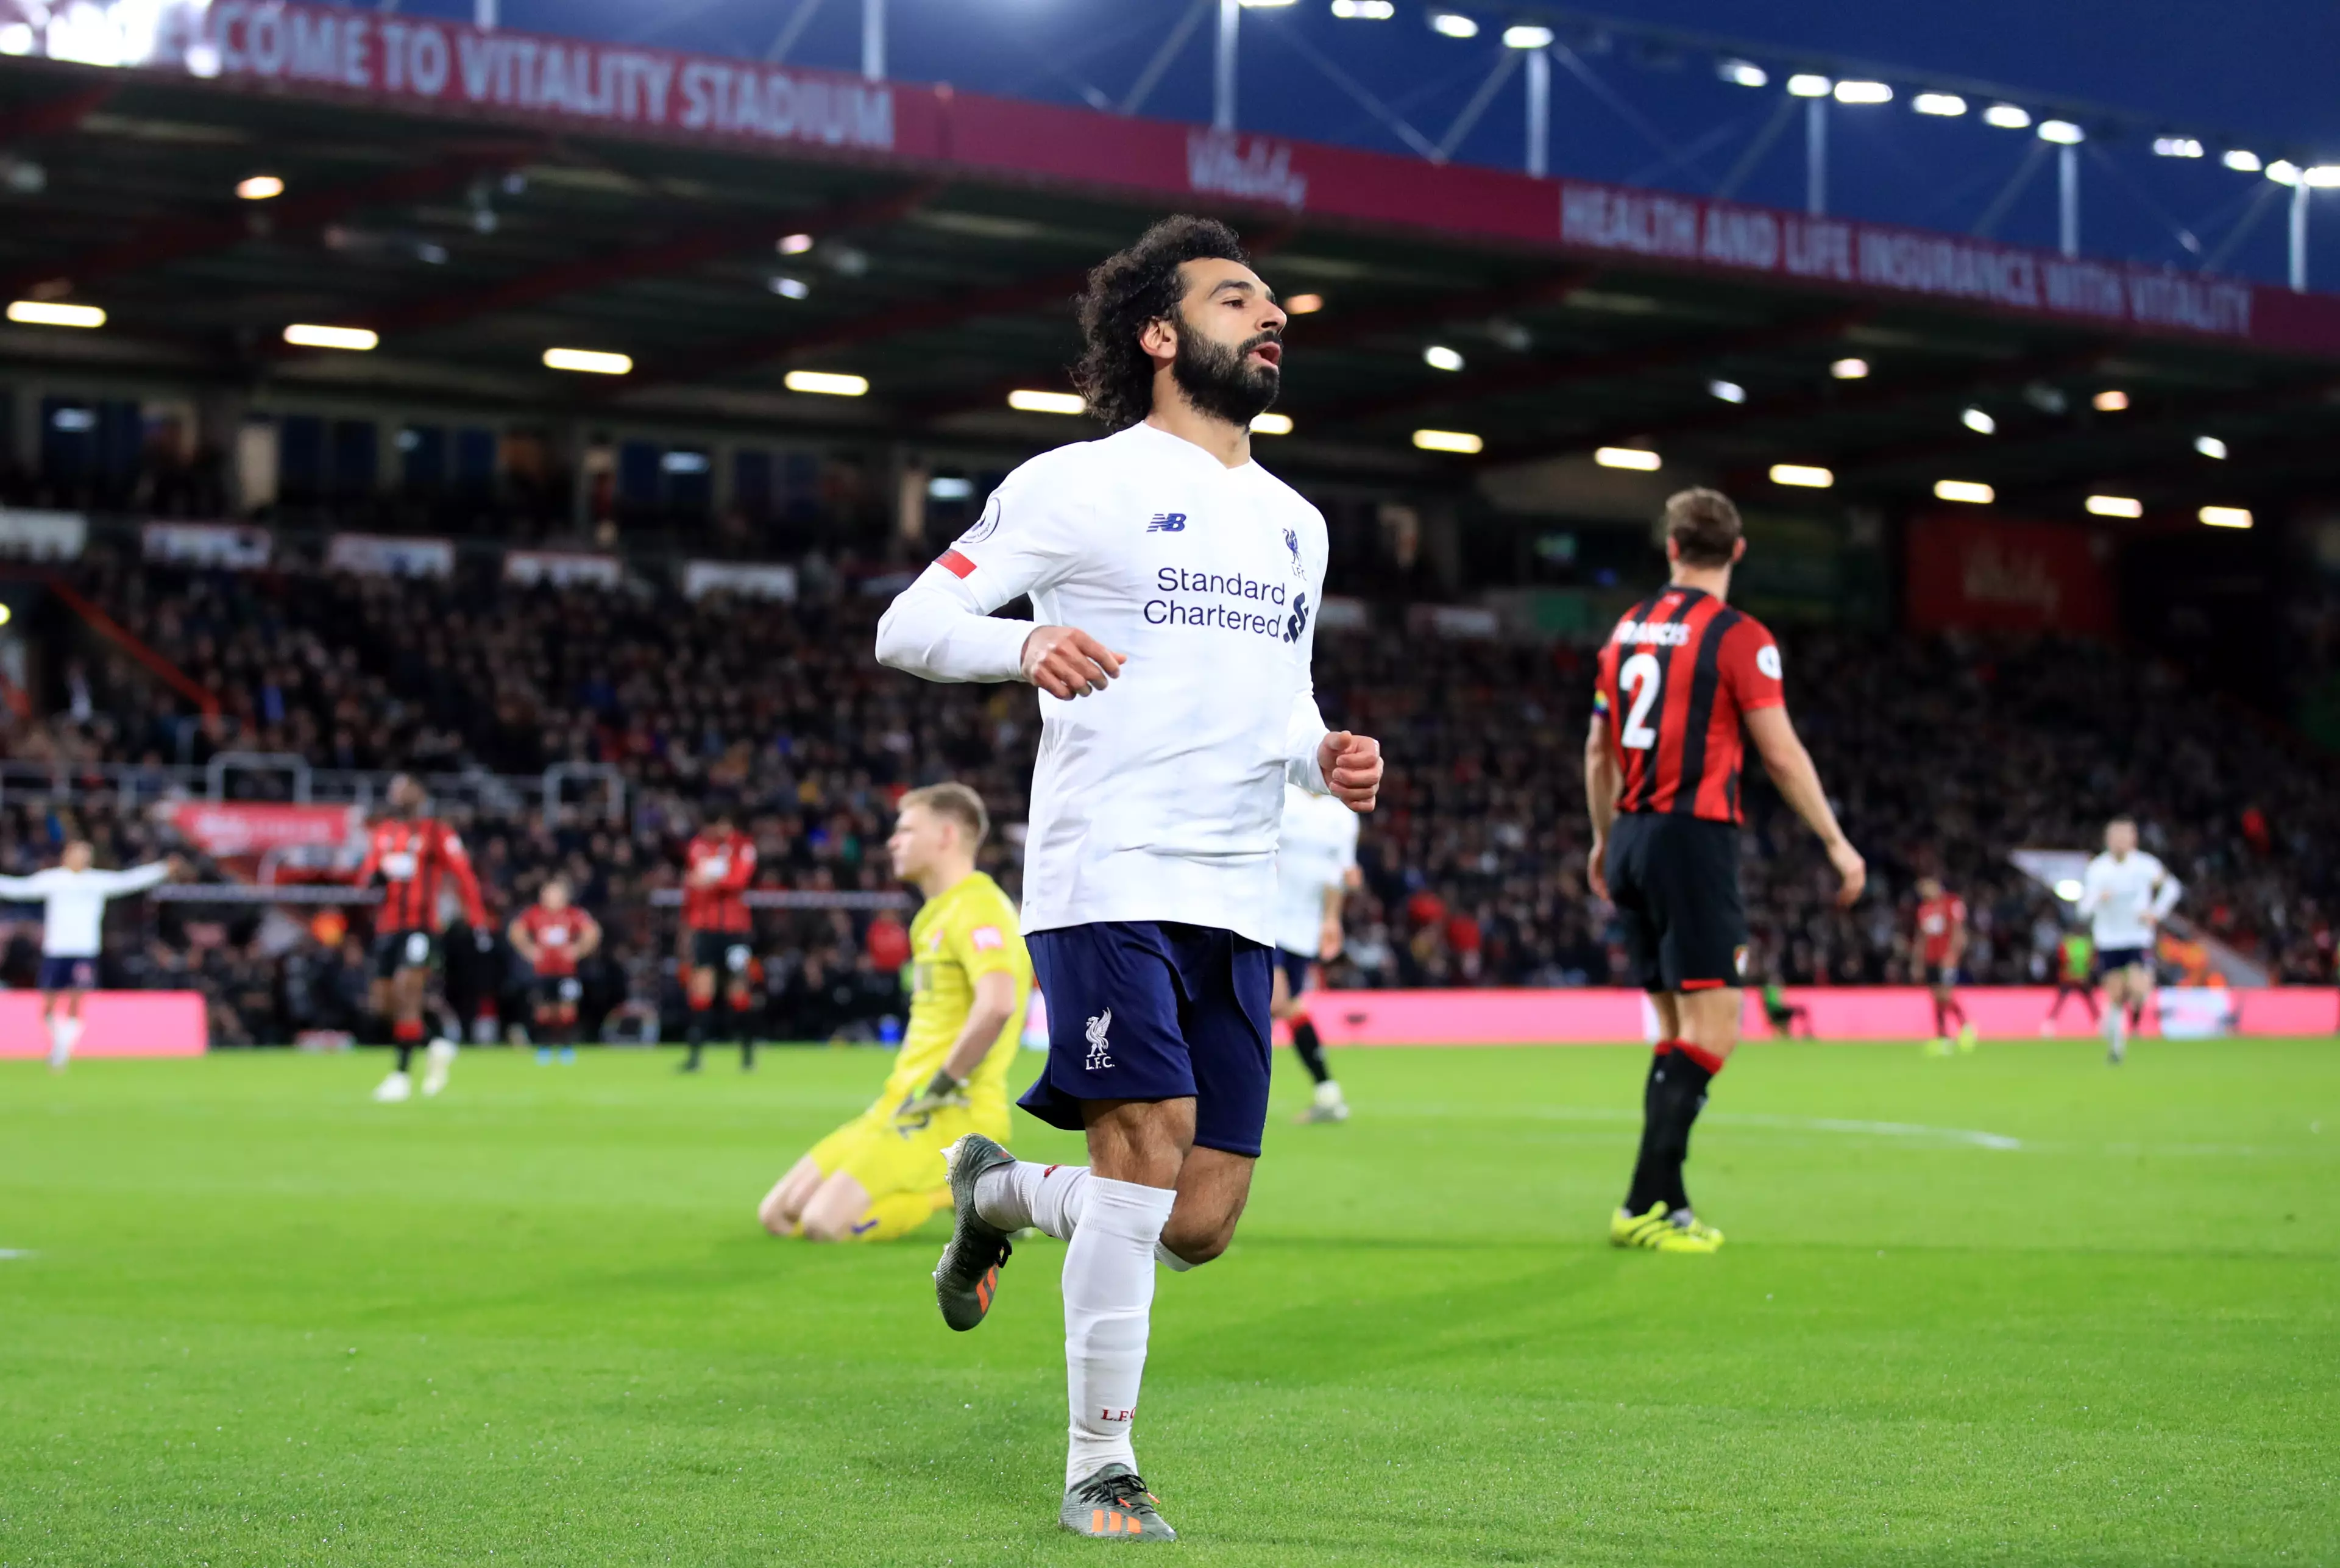 Mo Salah scored as Liverpool cruised to victory at Bournemouth on Saturday